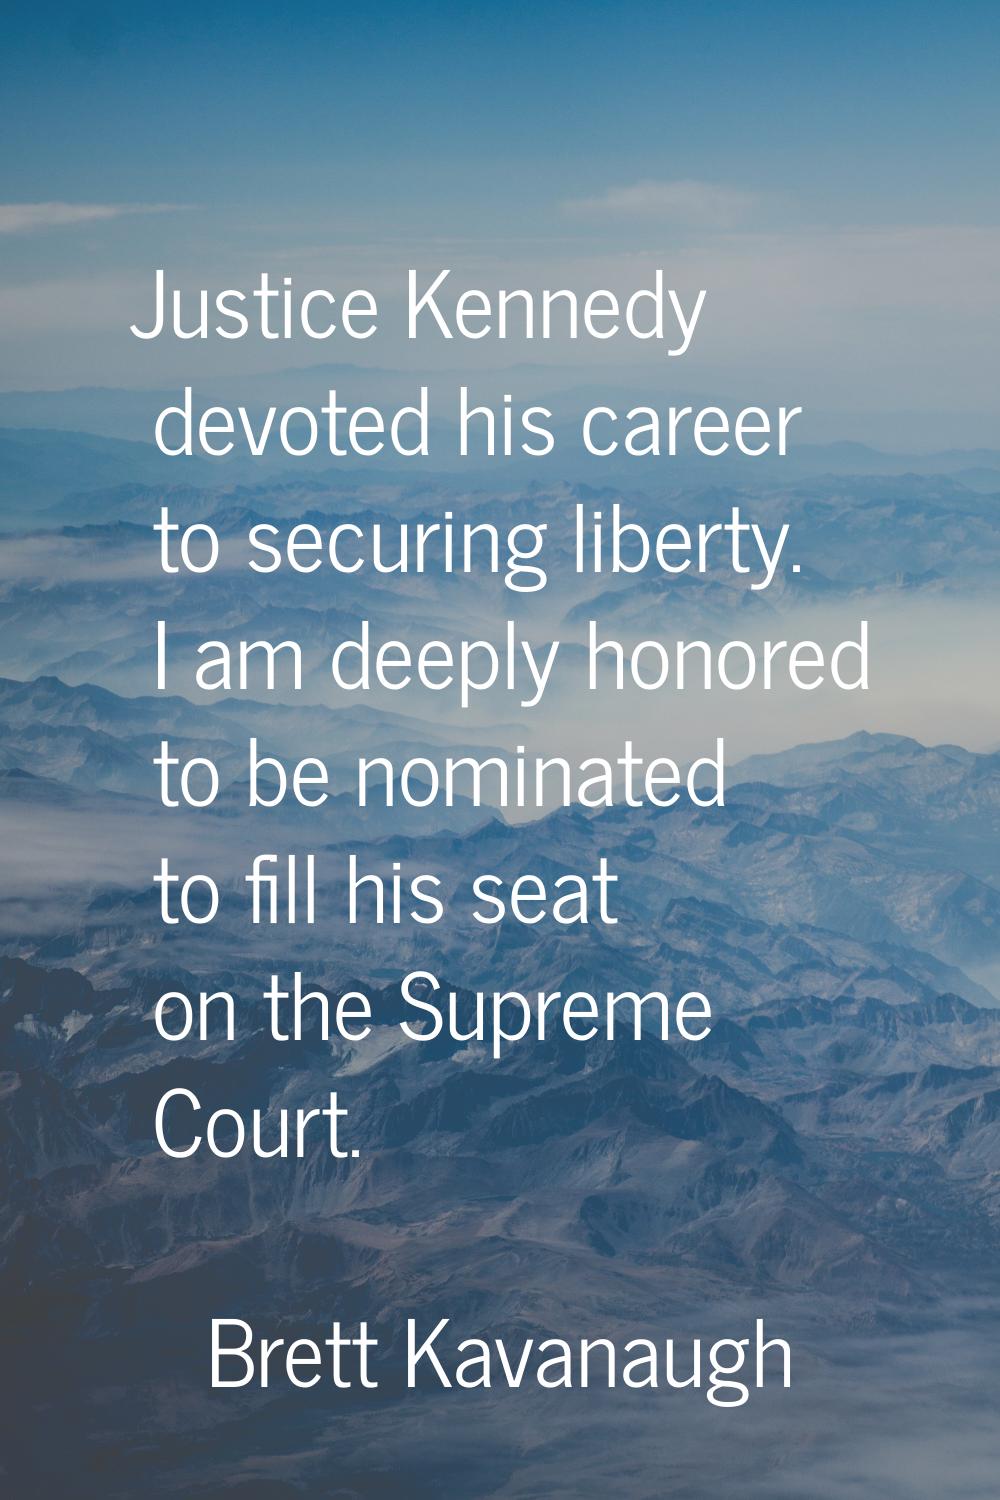 Justice Kennedy devoted his career to securing liberty. I am deeply honored to be nominated to fill